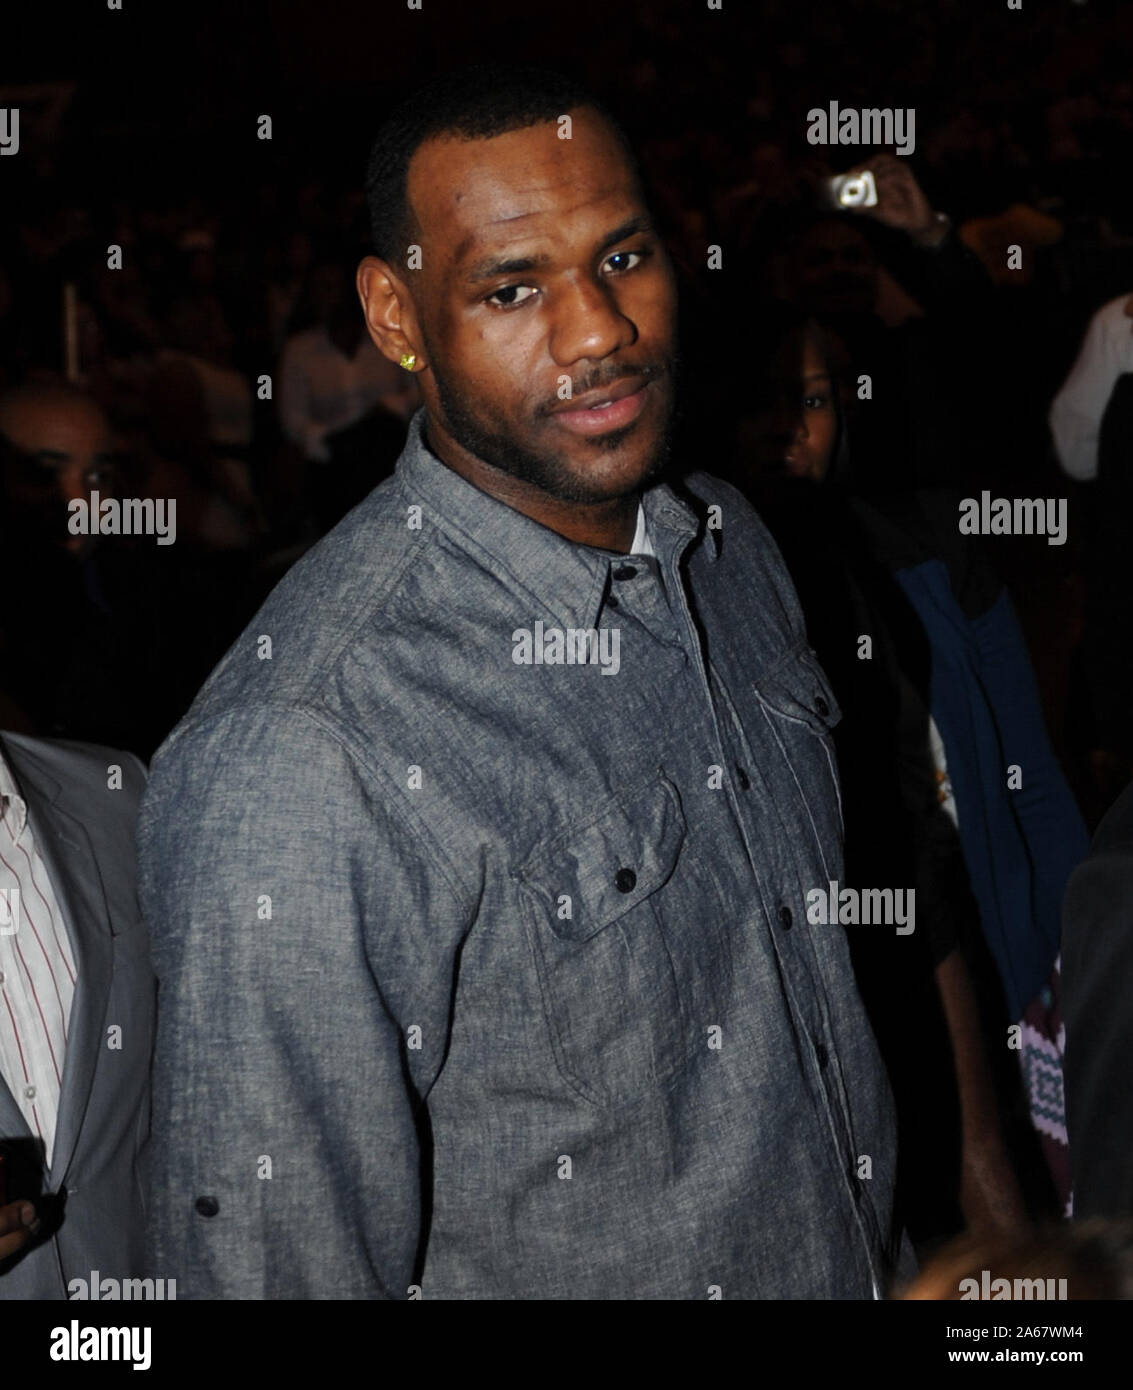 MIAMI BEACH, FL - DECEMBER 31: (EXCLUSIVE COVERAGE) LeBron James watches Usher (AKA Ursher Raymond IV (born October 14, 1978)  performs at AmericanAirlines Arena New Years Eve with special guest Trey Songz on December 31, 2010 in Miami, Florida  People:   LeBron James Stock Photo